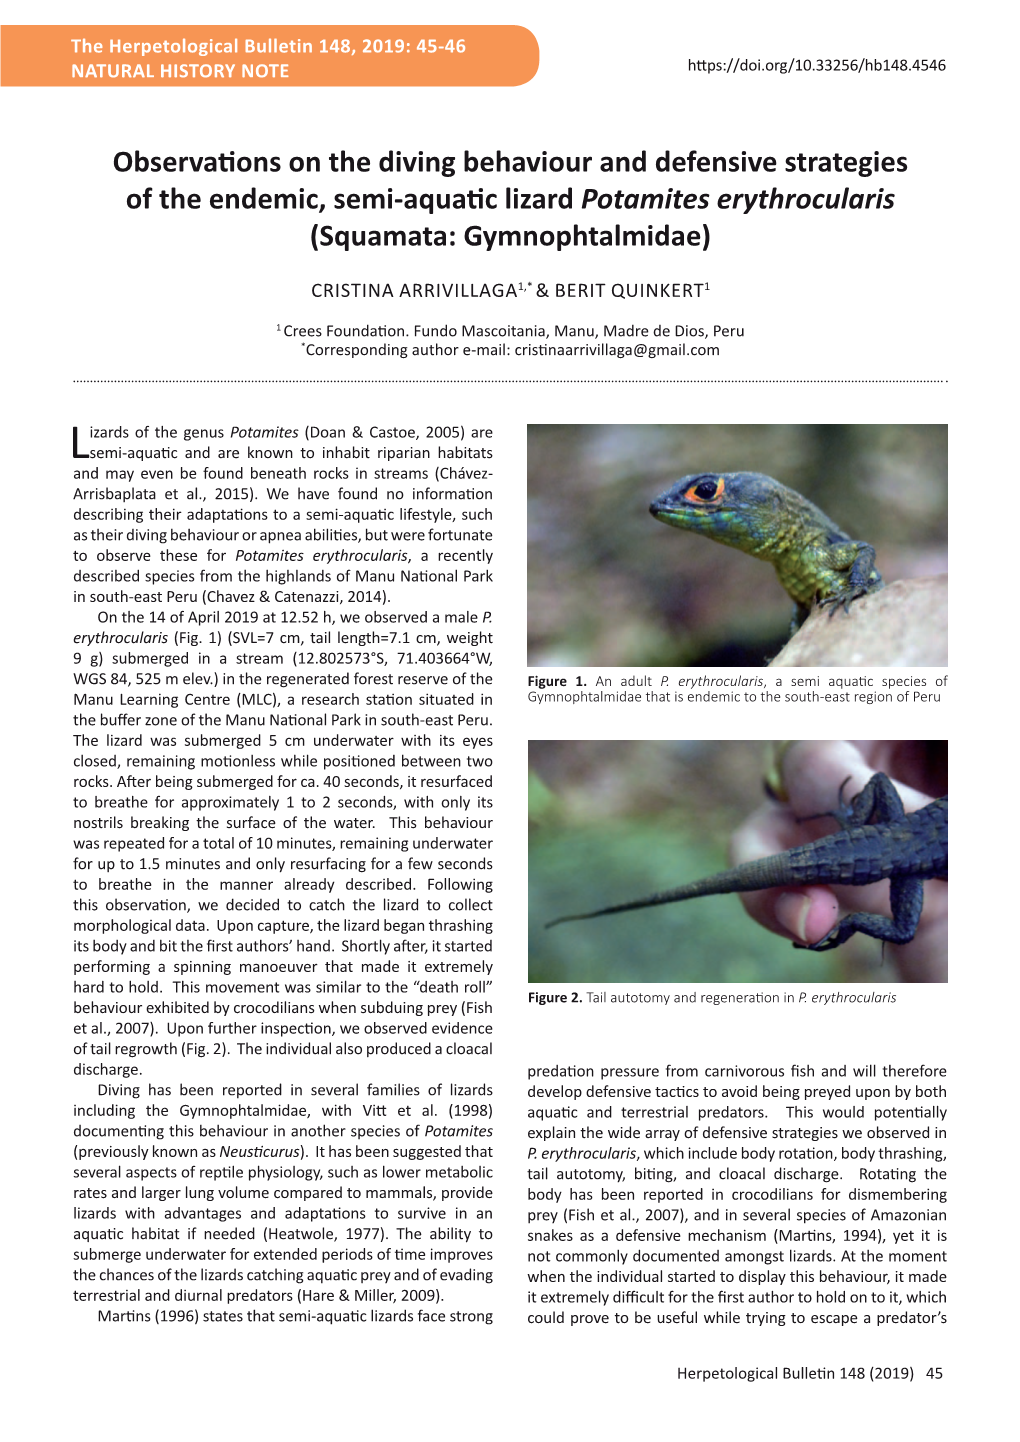 Observations on the Diving Behaviour and Defensive Strategies of the Endemic, Semi-Aquatic Lizard Potamites Erythrocularis (Squamata: Gymnophtalmidae)